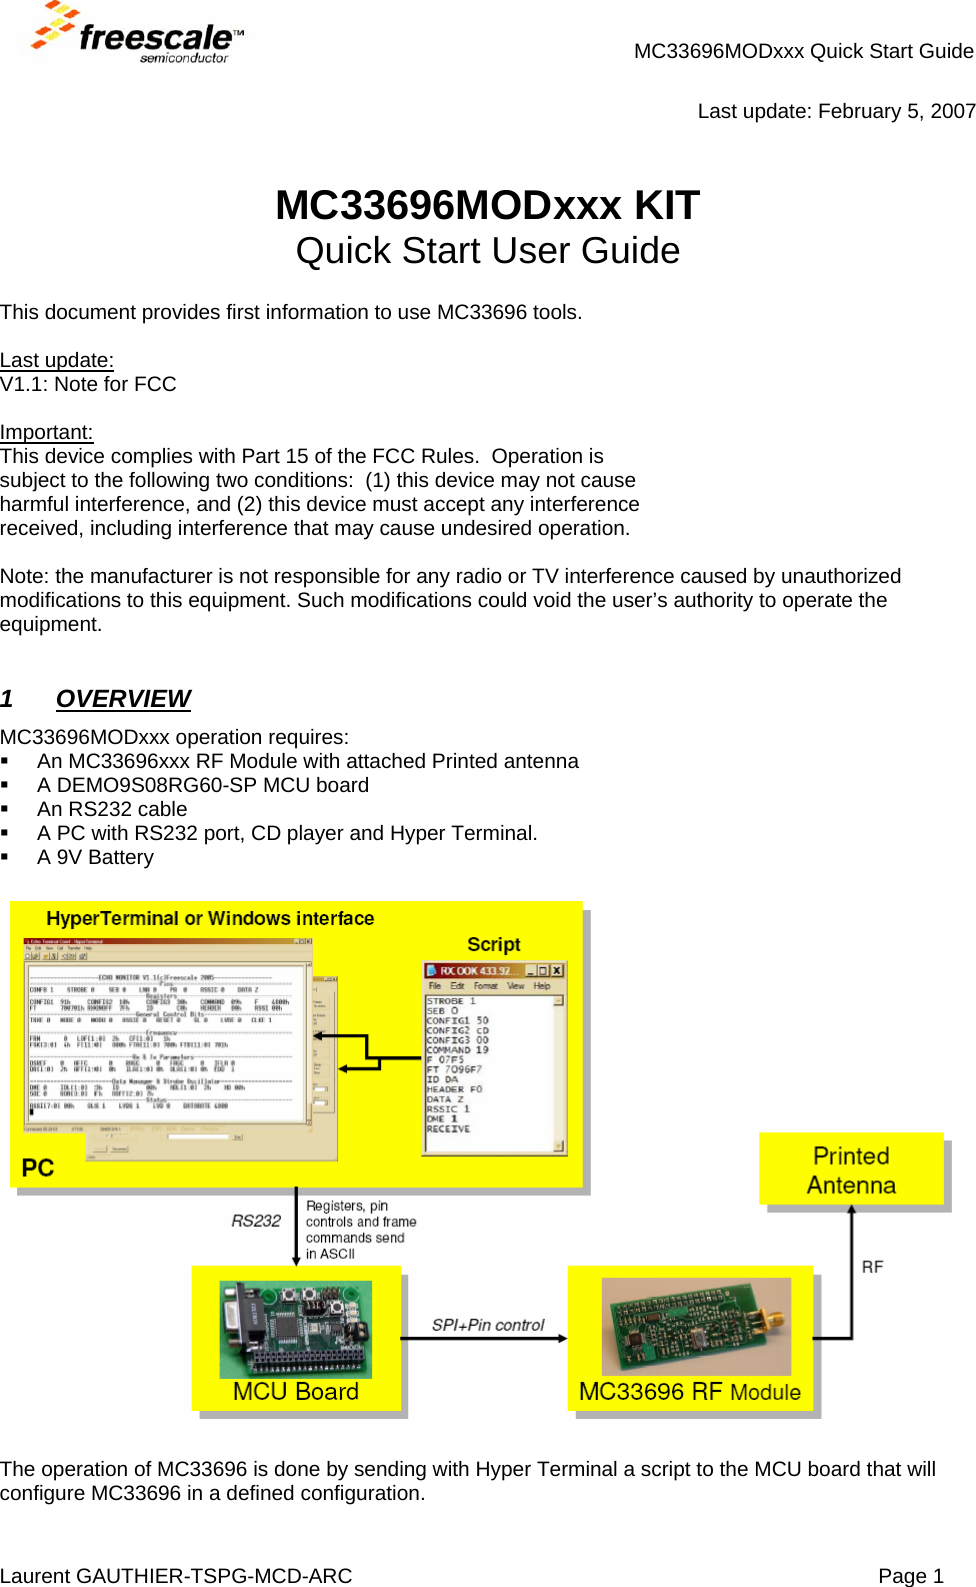 MC33696MODxxx Quick Start Guide Laurent GAUTHIER-TSPG-MCD-ARC  Page 1  Last update: February 5, 2007   MC33696MODxxx KIT Quick Start User Guide  This document provides first information to use MC33696 tools.  Last update: V1.1: Note for FCC  Important: This device complies with Part 15 of the FCC Rules.  Operation is subject to the following two conditions:  (1) this device may not cause harmful interference, and (2) this device must accept any interference received, including interference that may cause undesired operation.  Note: the manufacturer is not responsible for any radio or TV interference caused by unauthorized modifications to this equipment. Such modifications could void the user’s authority to operate the equipment.   1 OVERVIEW  MC33696MODxxx operation requires:   An MC33696xxx RF Module with attached Printed antenna   A DEMO9S08RG60-SP MCU board  An RS232 cable   A PC with RS232 port, CD player and Hyper Terminal.   A 9V Battery    The operation of MC33696 is done by sending with Hyper Terminal a script to the MCU board that will configure MC33696 in a defined configuration. 